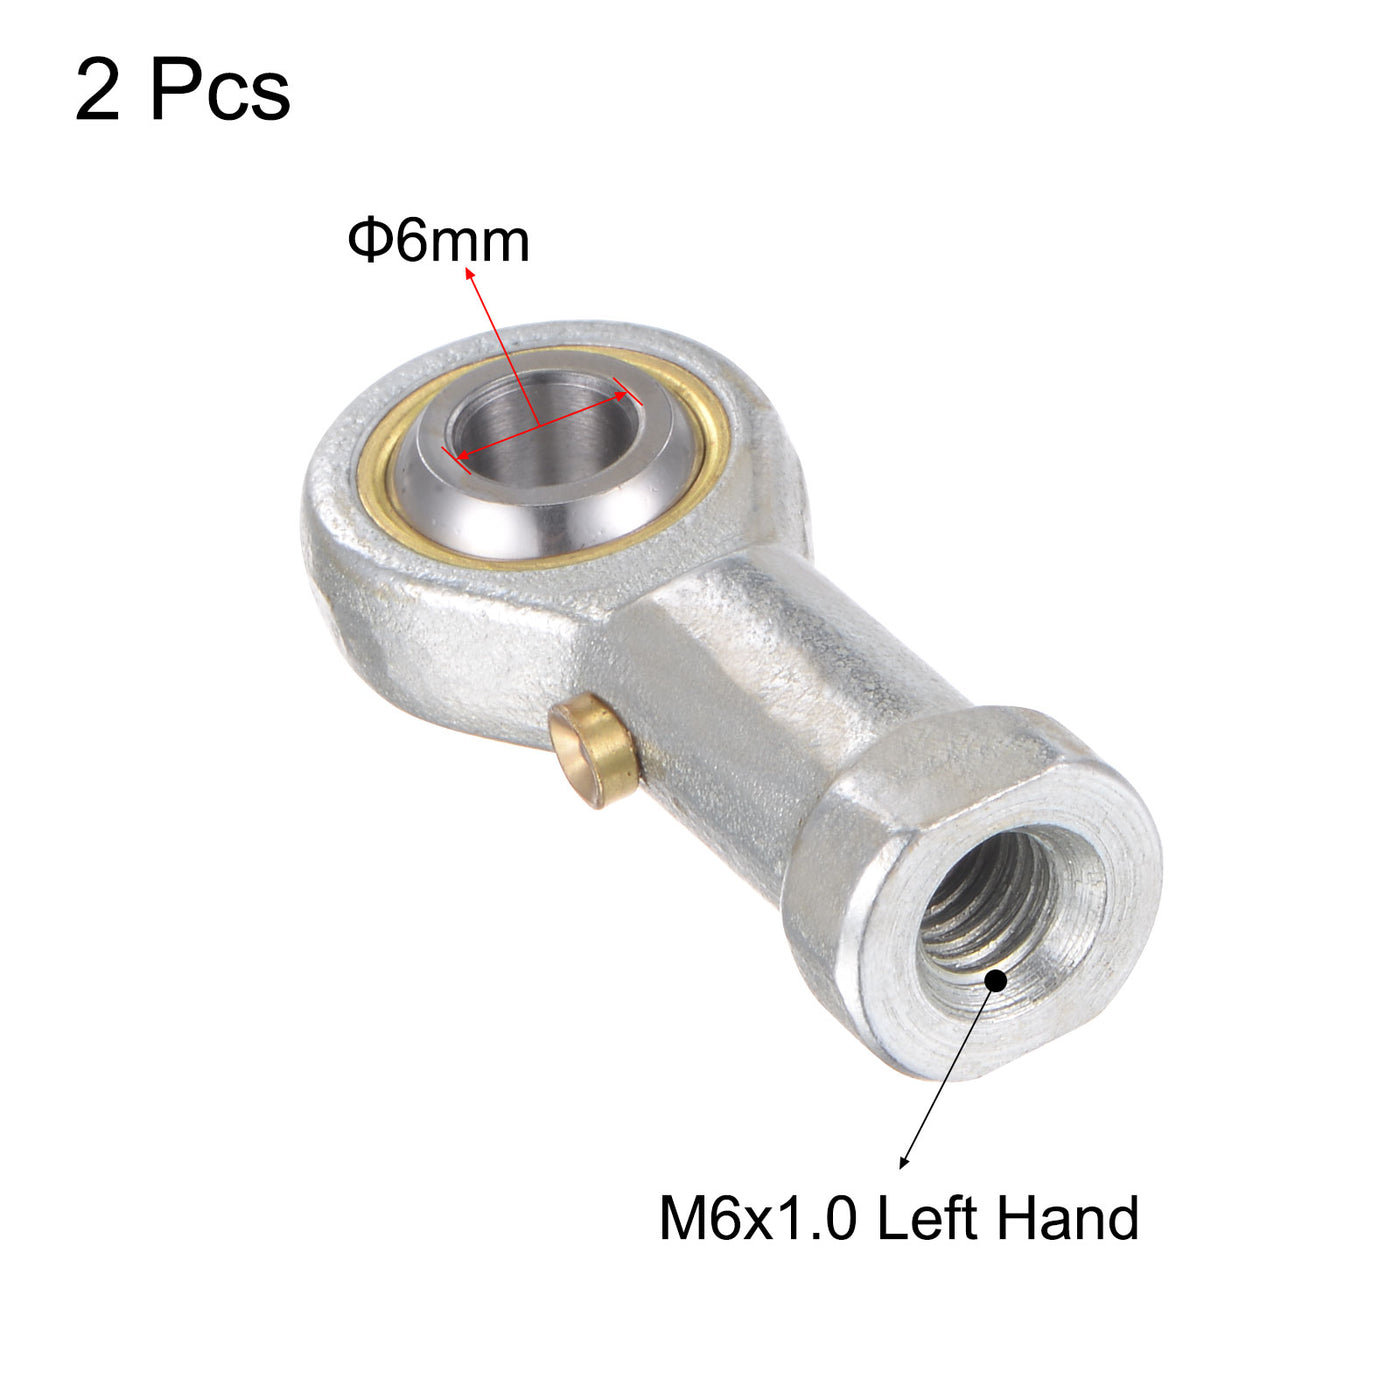 uxcell Uxcell 2pcs PHS6 Rod End Bearing 6mm Bore Self-lubricated M6 Left Hand Female Thread